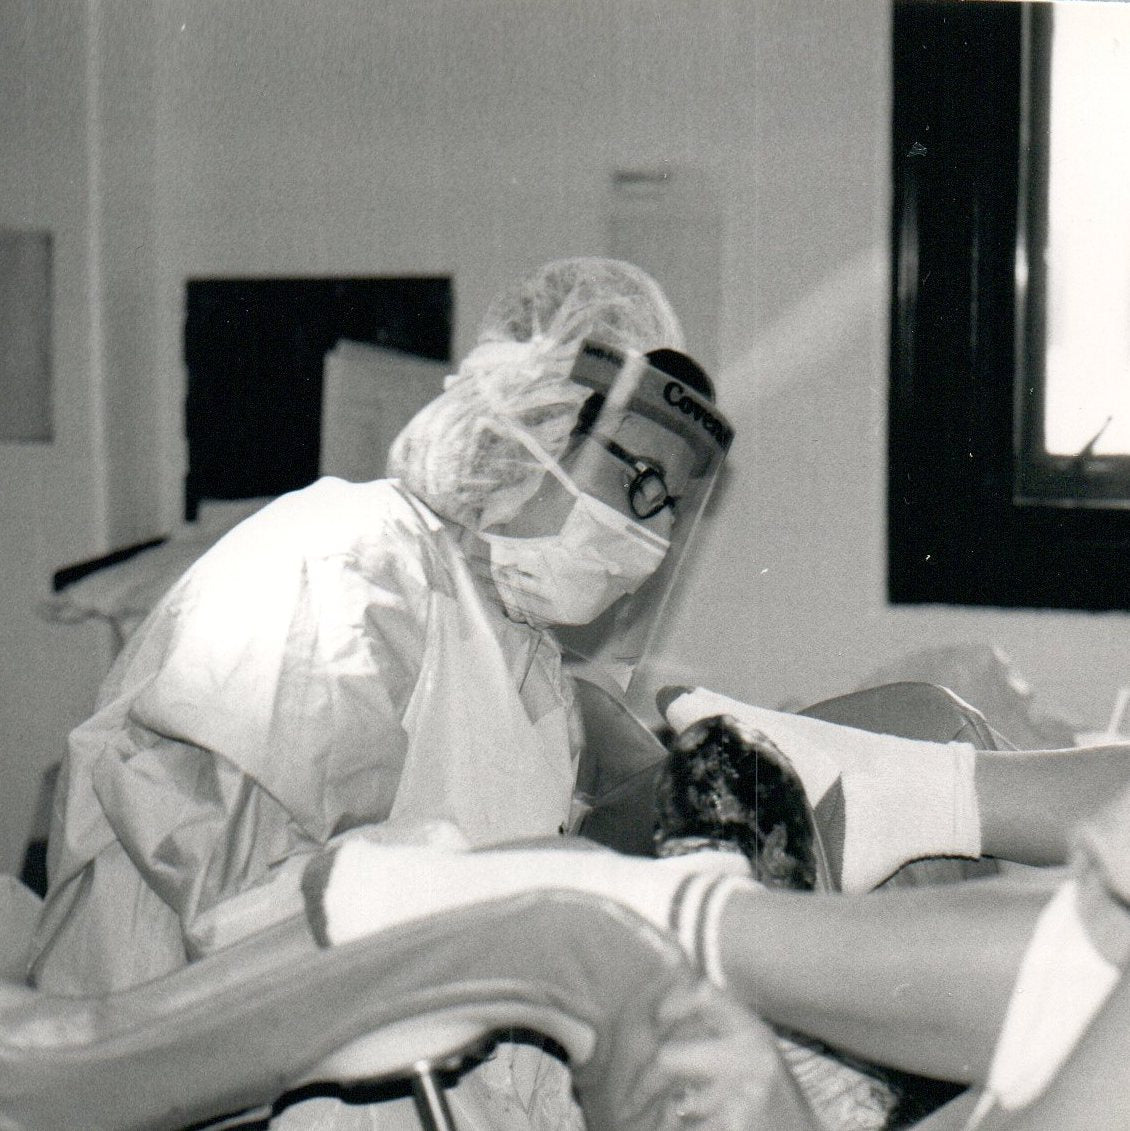 Dr. Falzon in action, delivering a baby in 1992